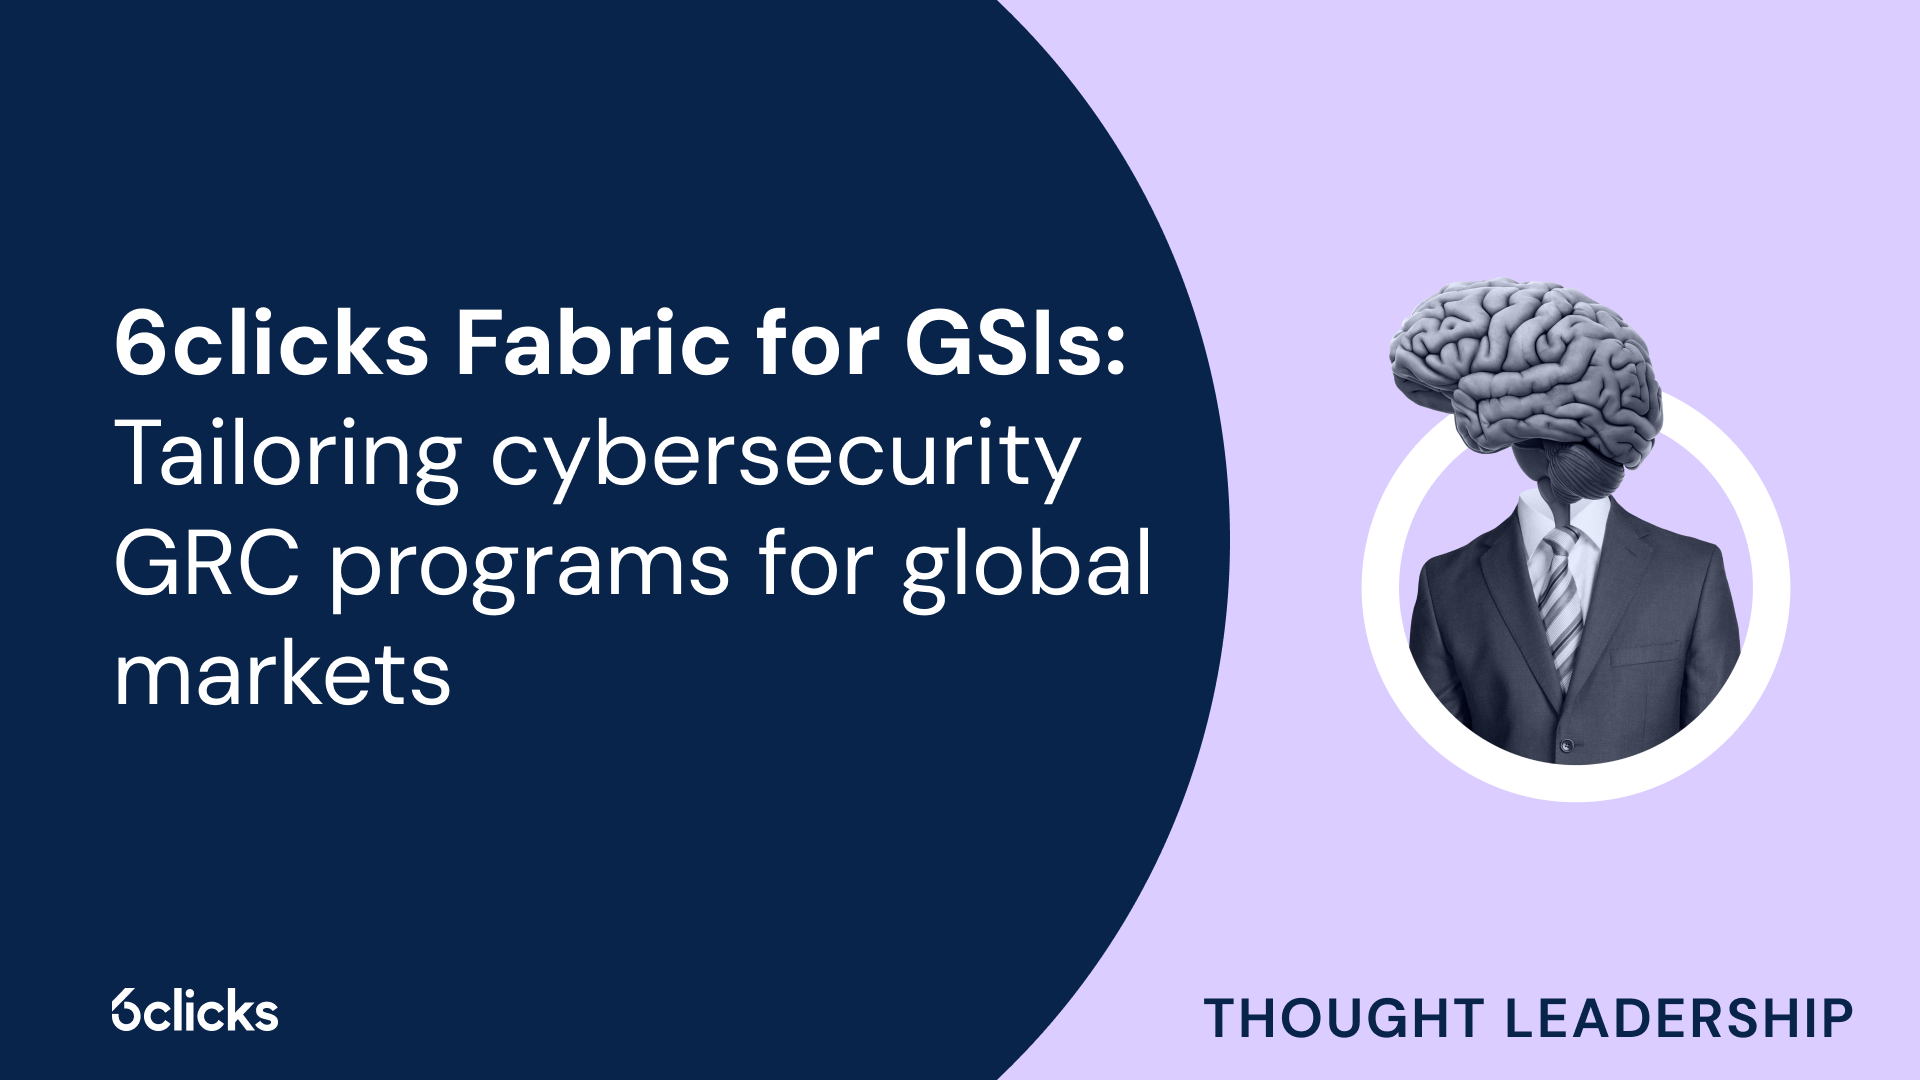 6clicks Fabric for GSIs: Tailoring cybersecurity GRC programs for global markets